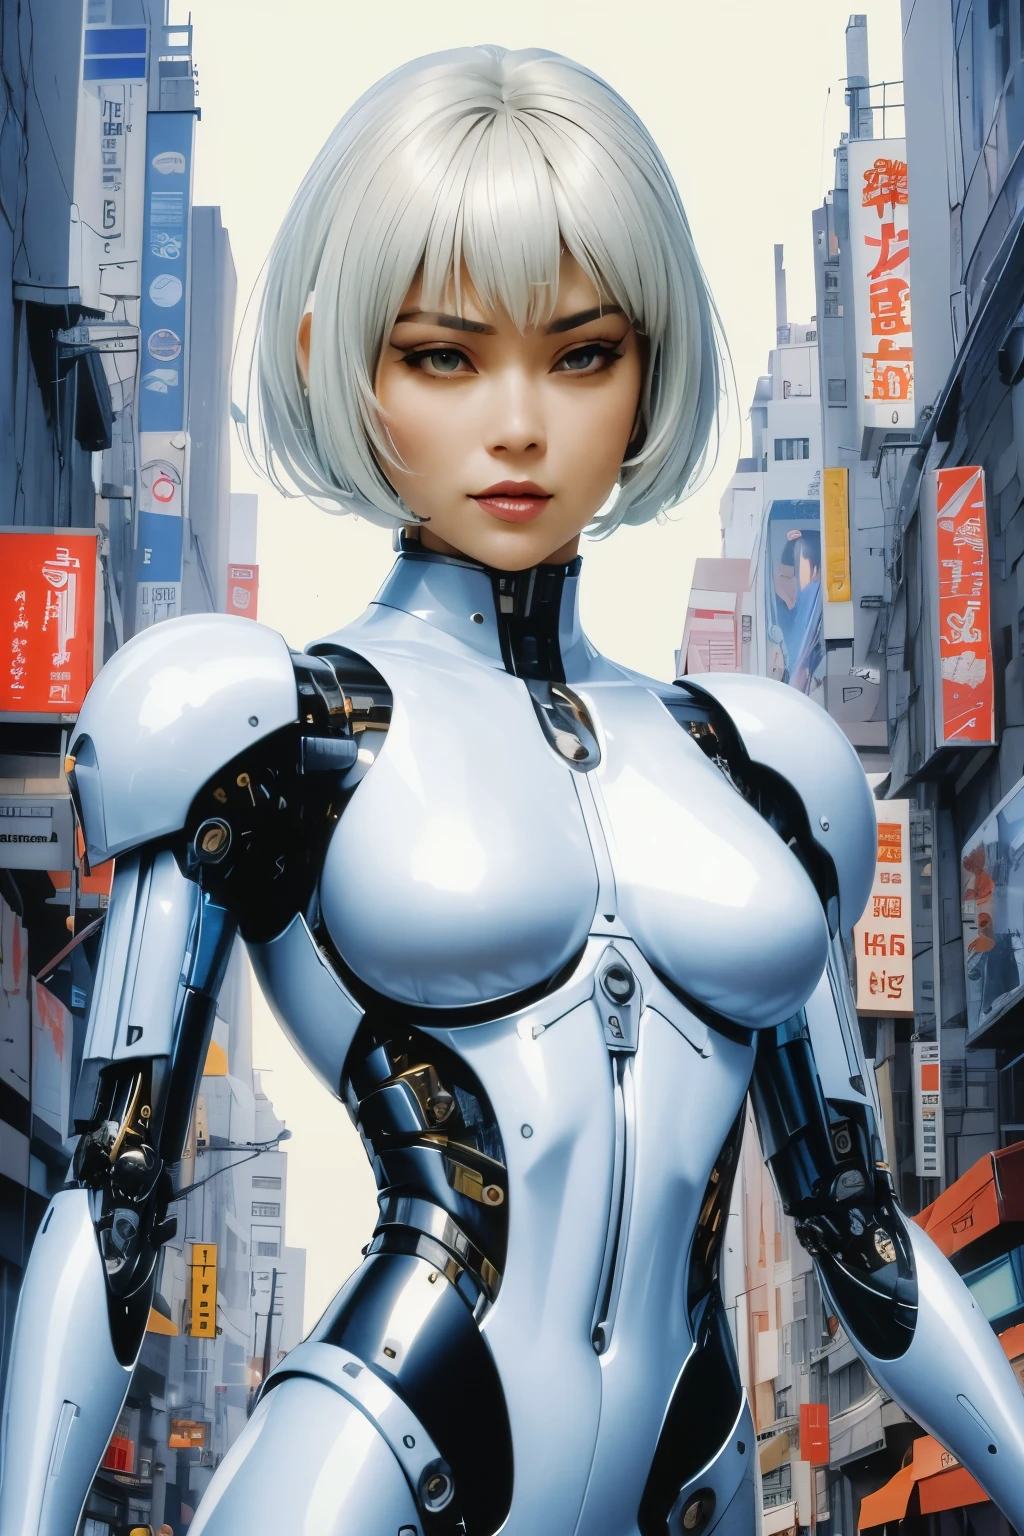 a close-up of a woman in a futuristic suit on a city street, cyborg - girl, cyborg - girl with silver hair, chica cyborg, perfect animated cyborg woman, beautiful cyborg girl, cute chica cyborg, japanese cyborg, perfect android girl, Beautiful white cyborg girl, perfect cyborg woman, cyborg girl, animated cyborg, retrofuturistic female android